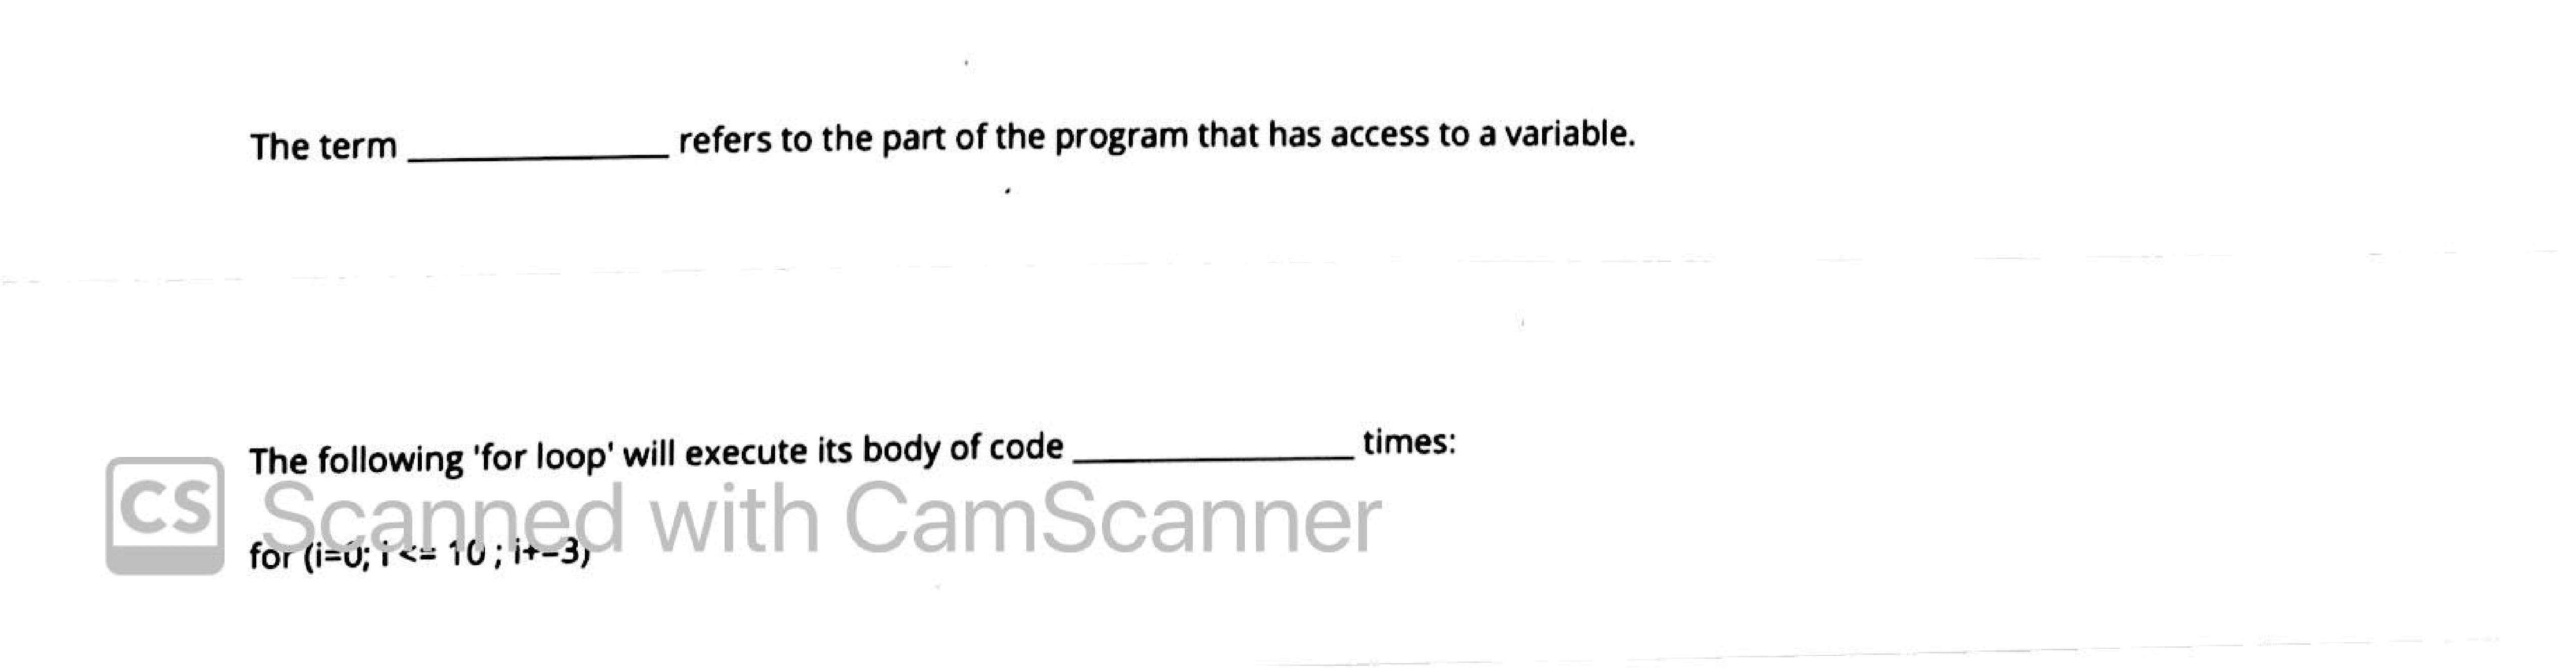 The term
refers to the part of the program that has access to a variable.
